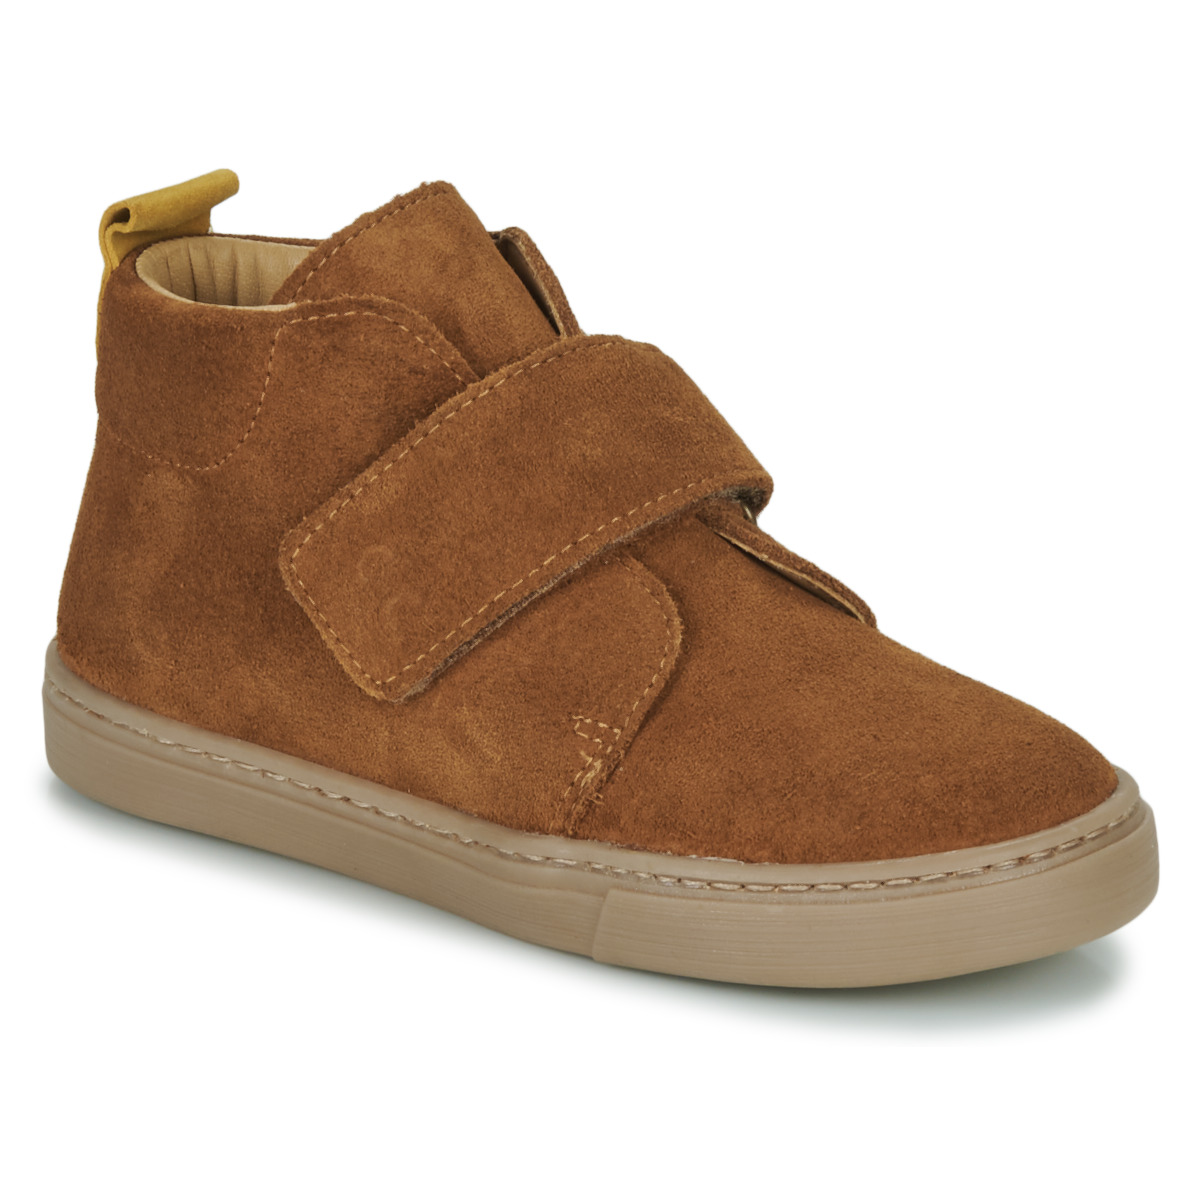 Chaussures Garçon Boots buy tommy hilfiger fashion wedge sneakers FOJAMO Camel